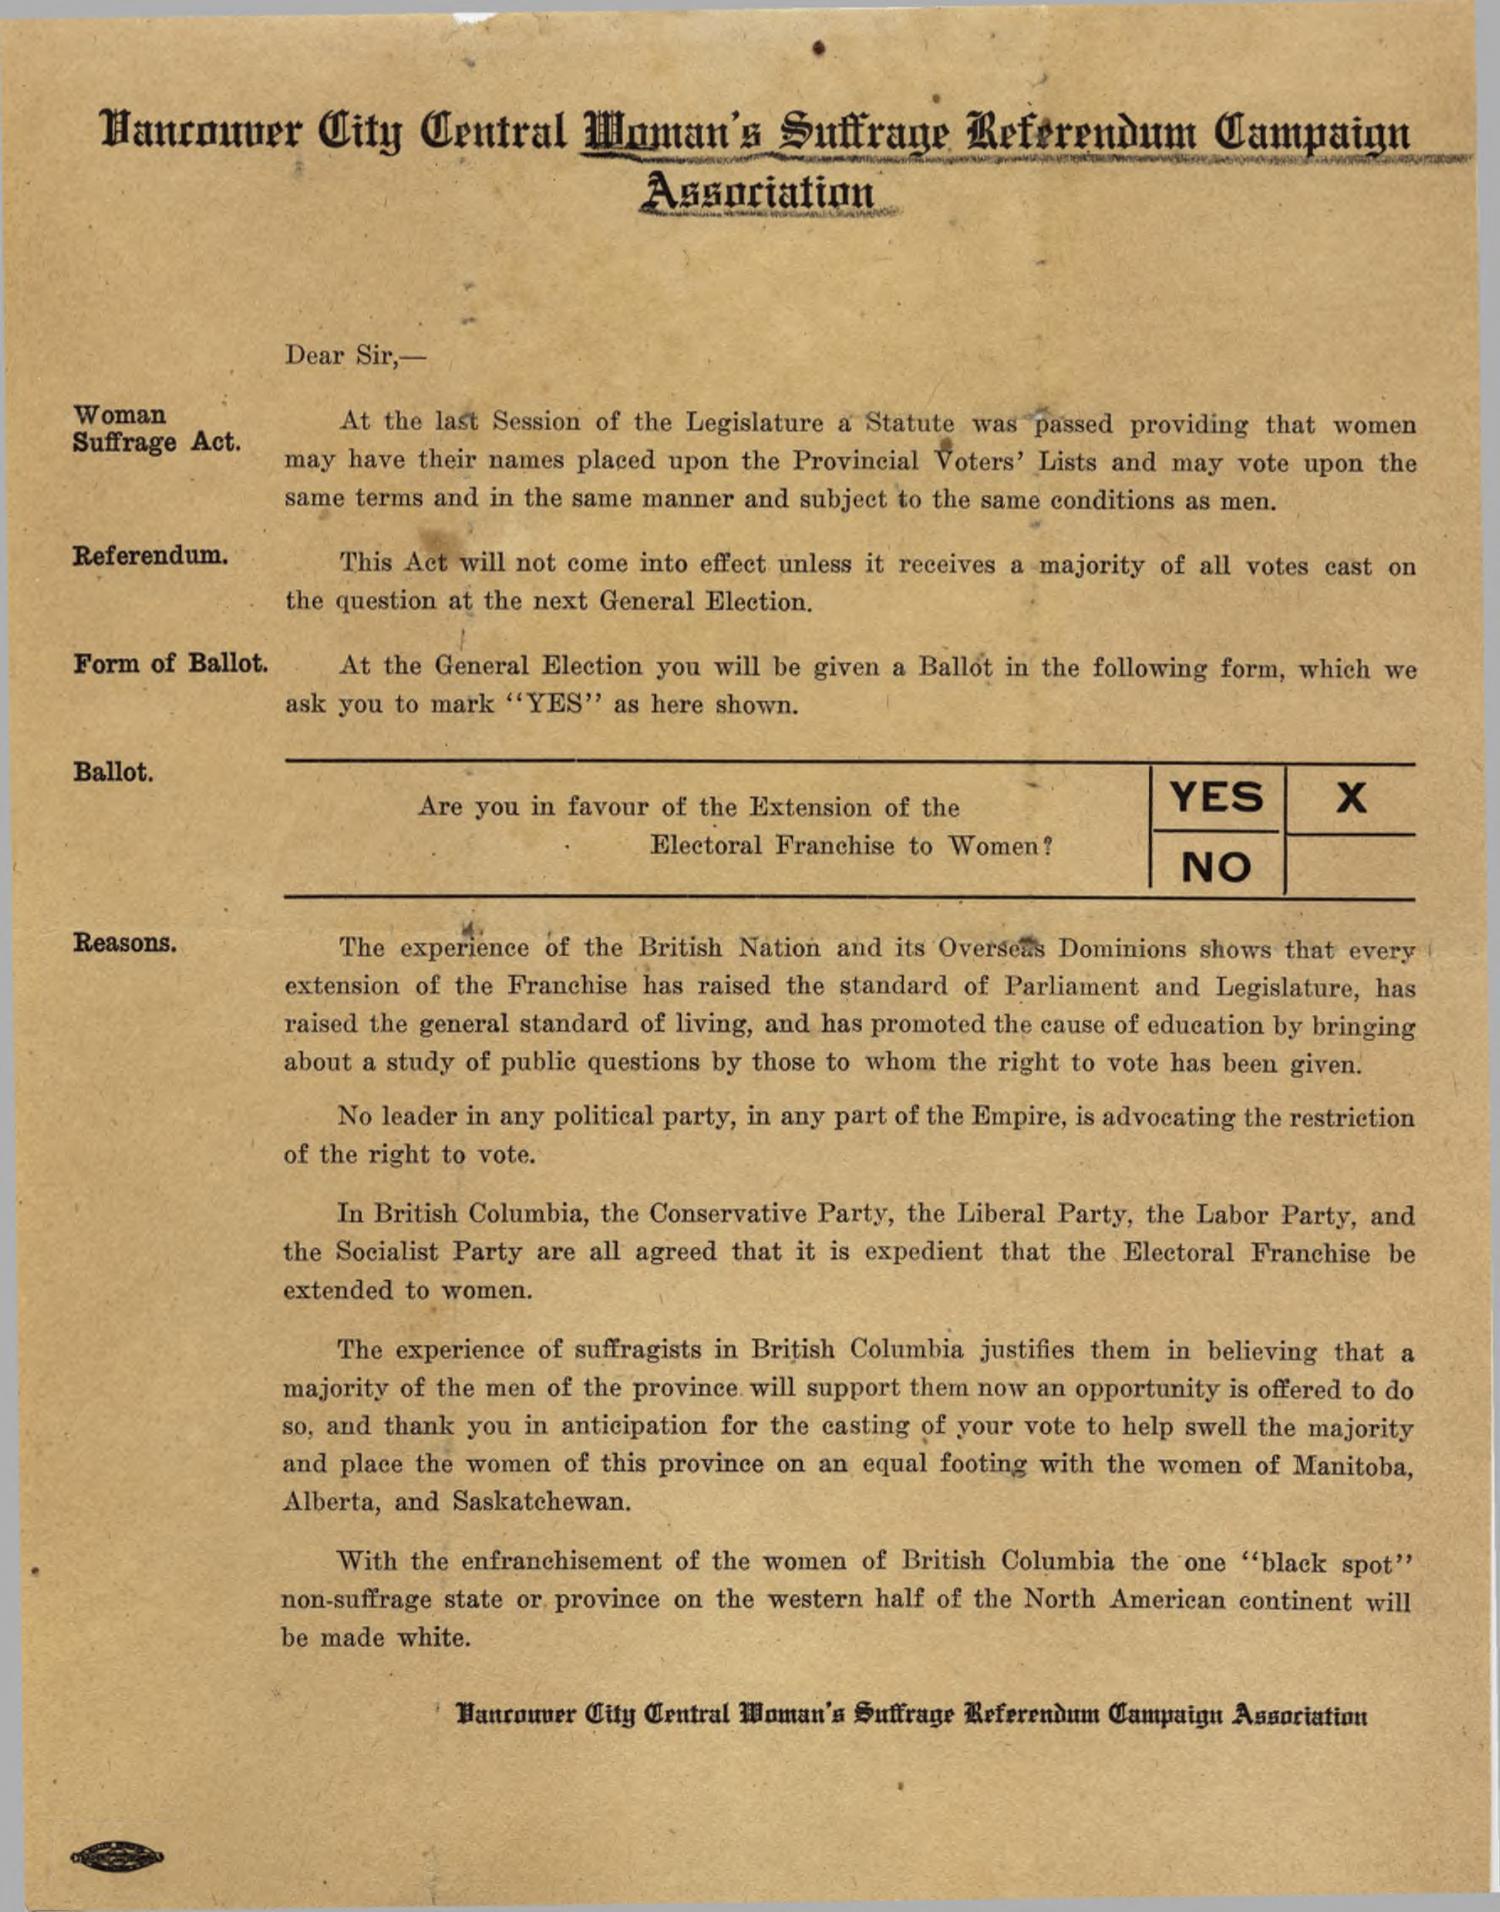 Vancouver City Central Woman's Suffrage Referendum Campaign Association document advocating for women's enfranshisement / suffrage with a ballot that ask: "are you in favour of the extension of the electoral franchise to women?" with the Yes ballot marked